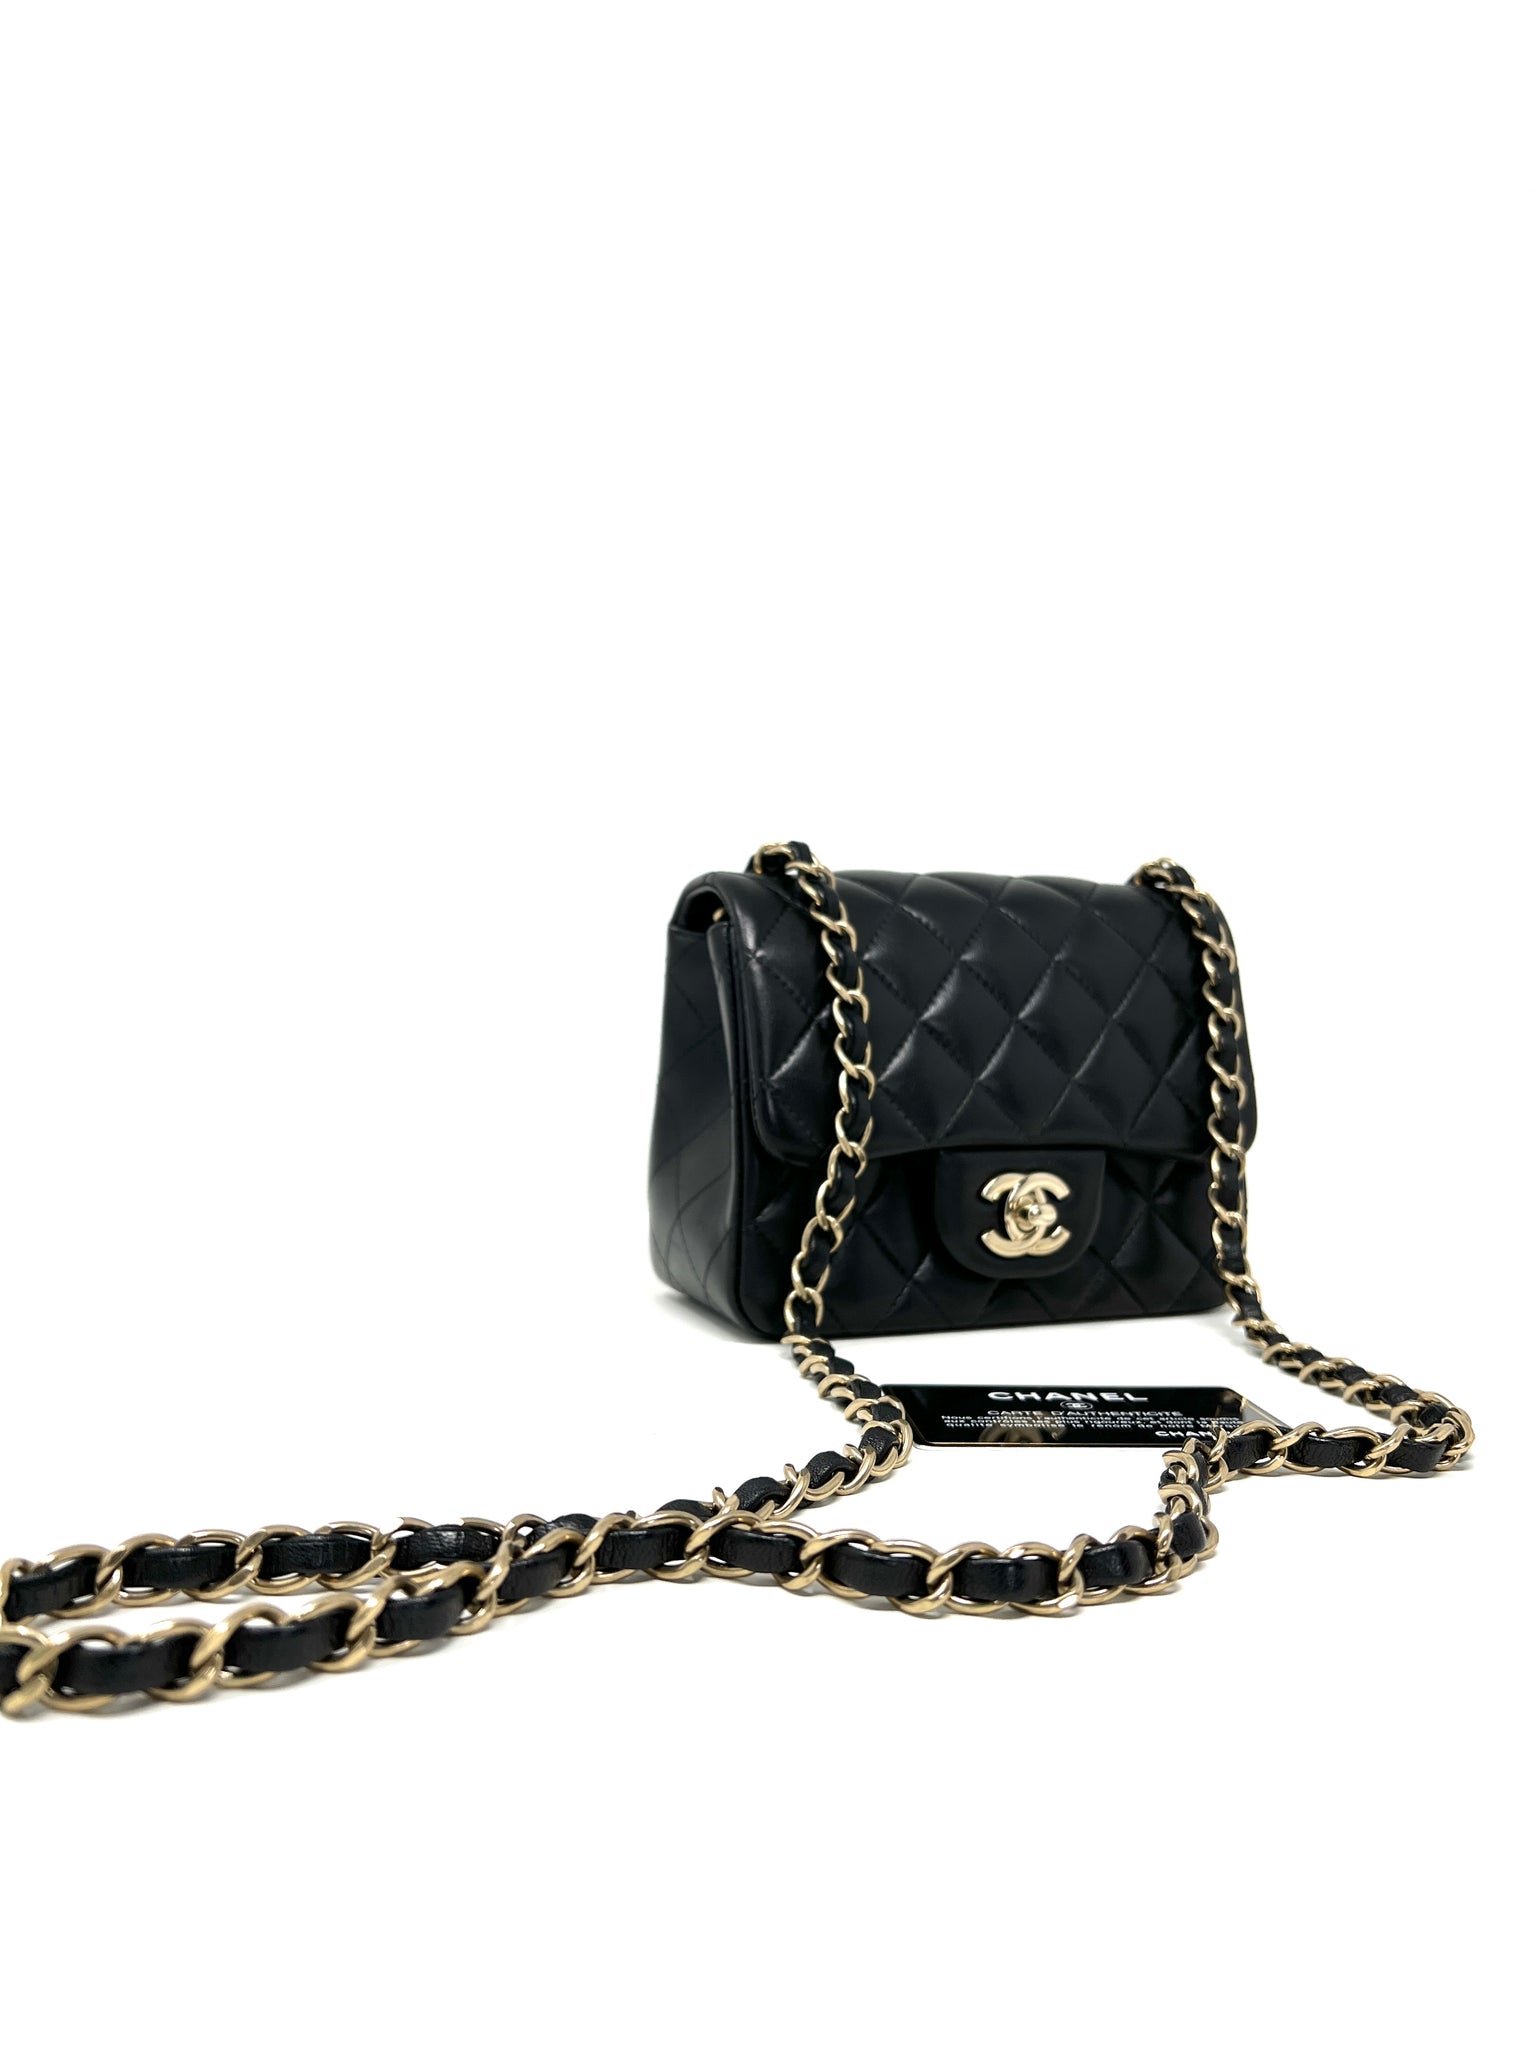 CHANEL Caviar Quilted Mini Square Flap Bag Black  FASHIONPHILE  Chanel  mini square Chanel mini Bags